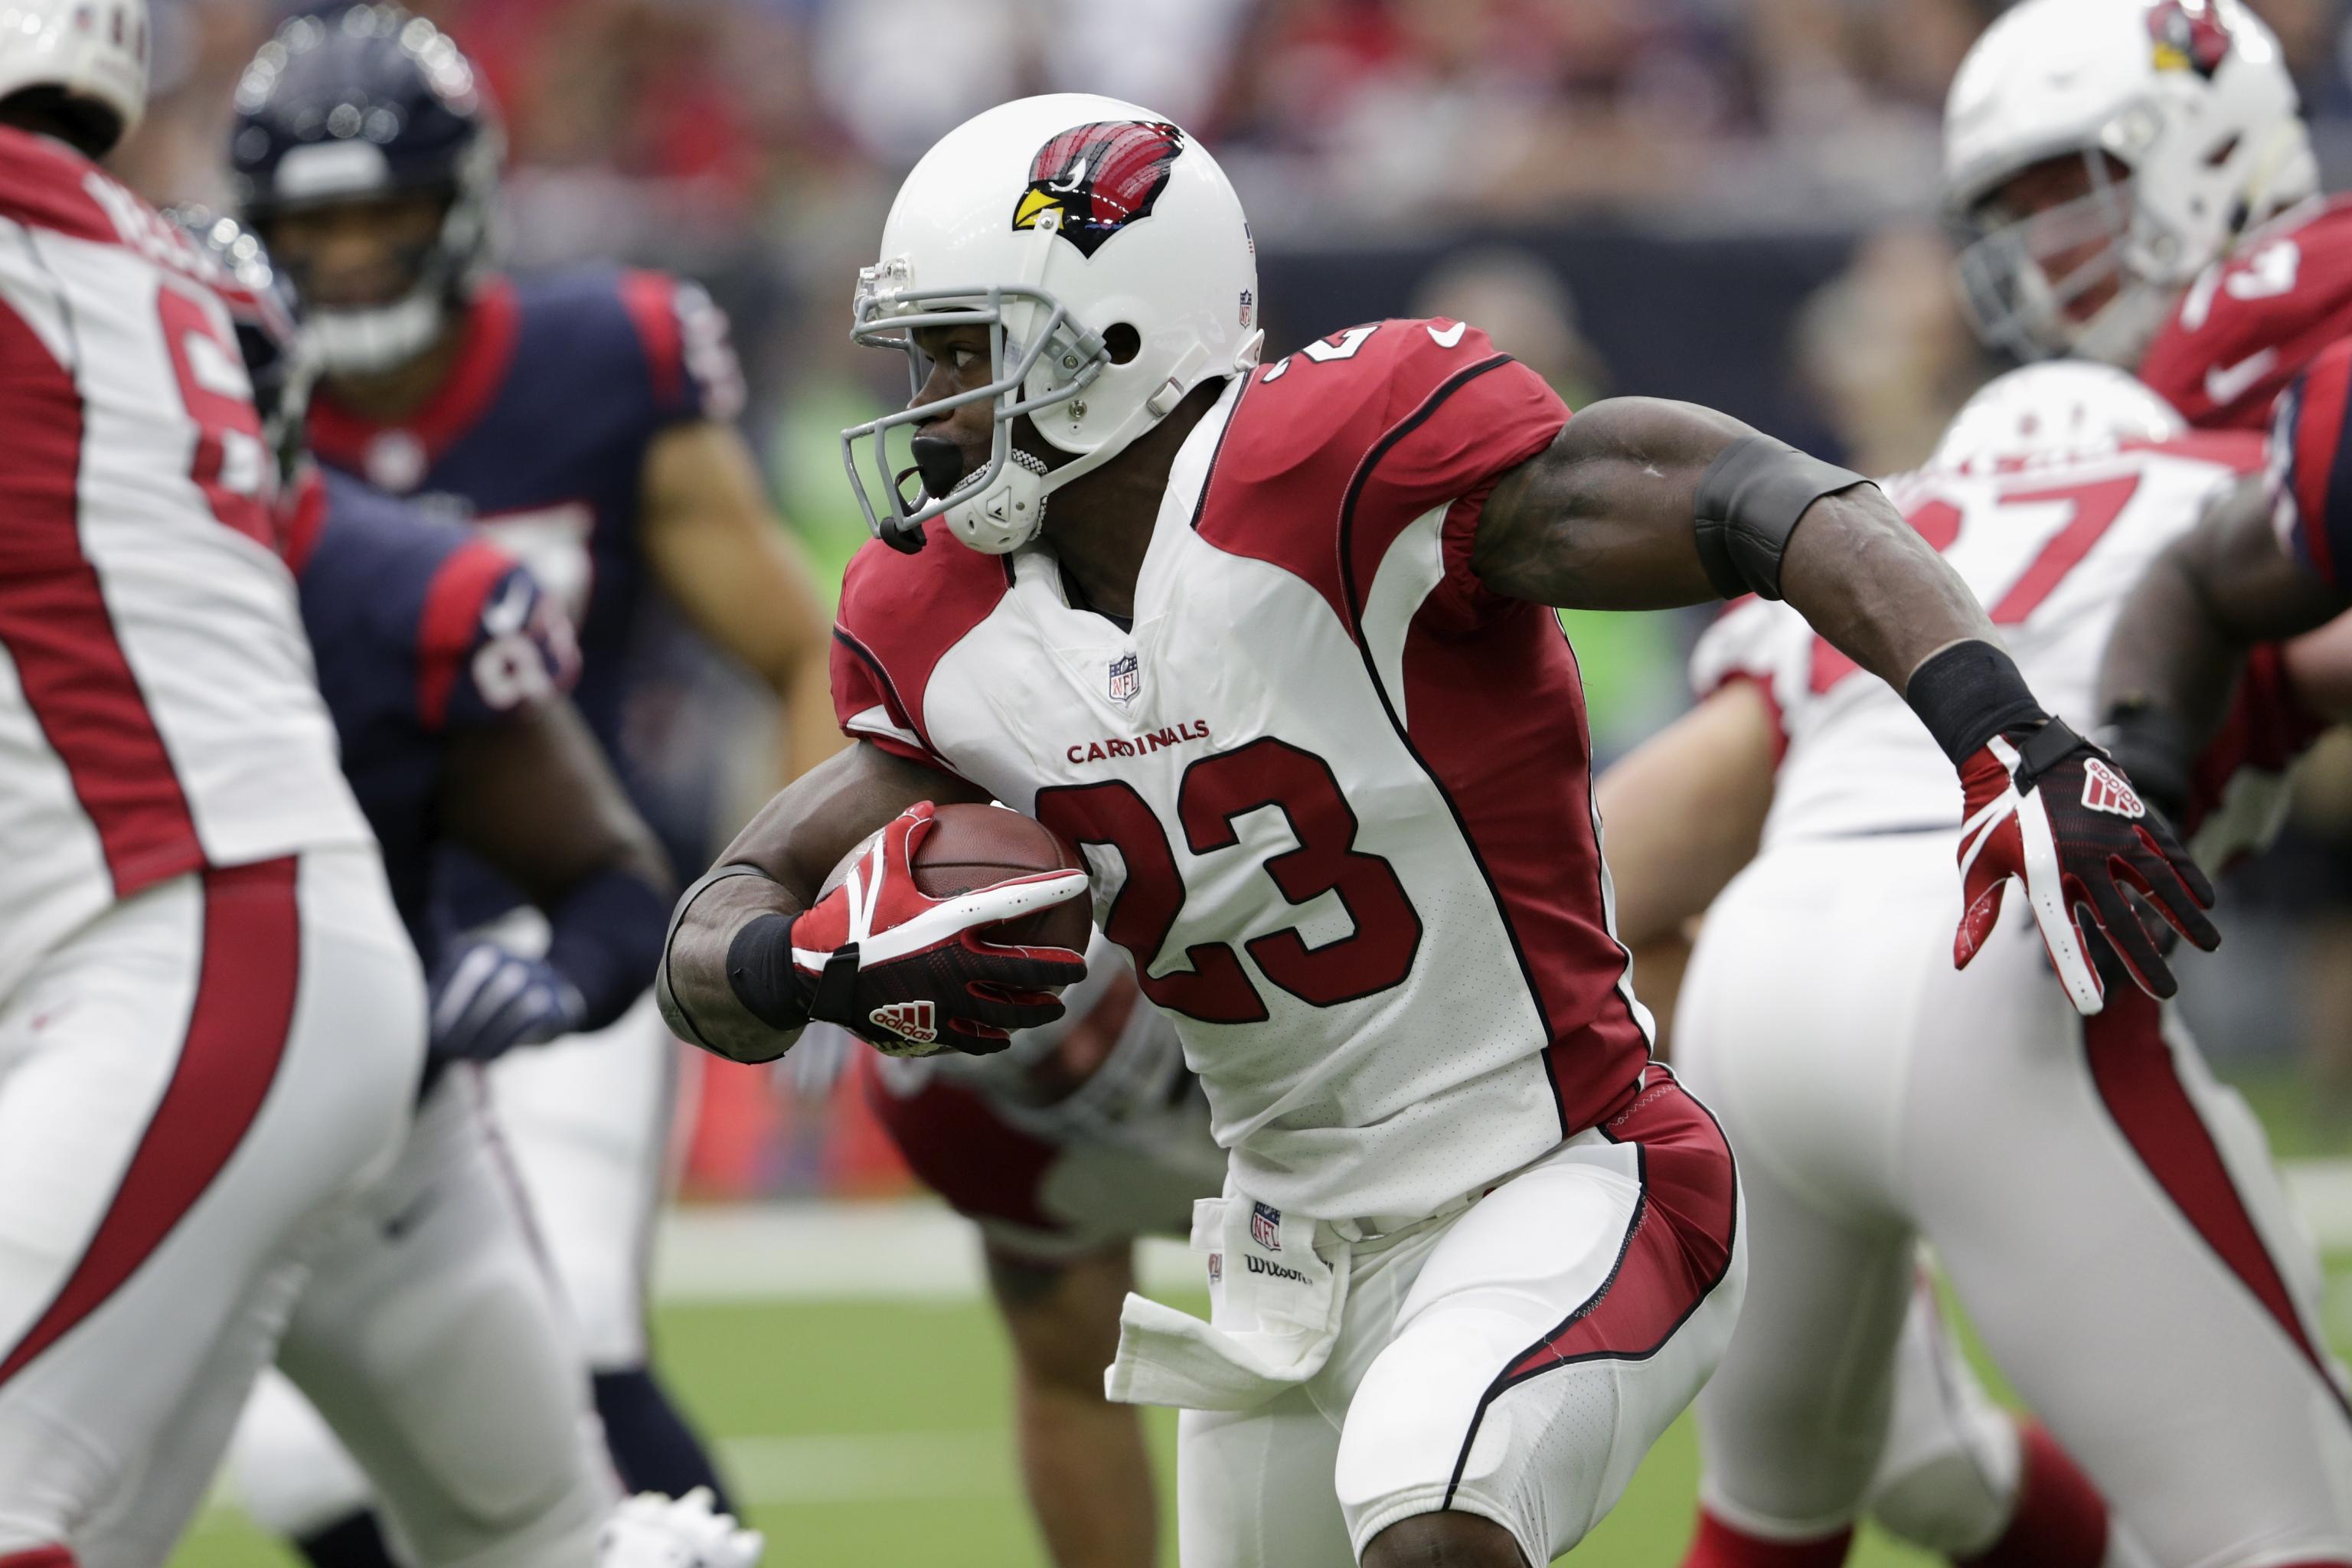 Adrian Peterson to miss rest of Cardinals' season due to neck injury